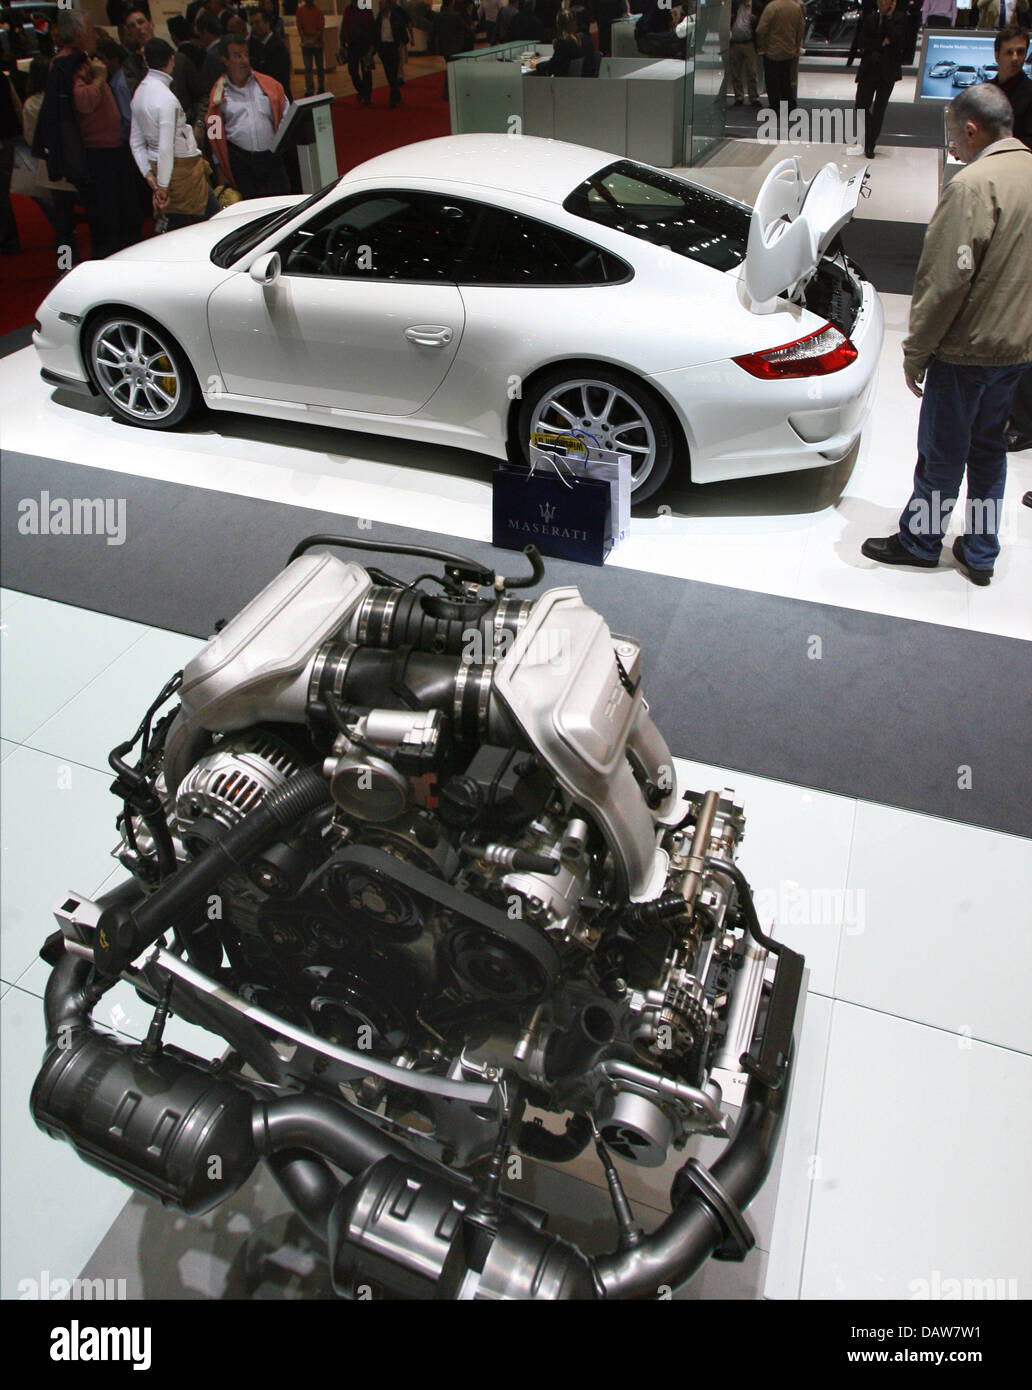 A six-cylinder Porsche boxer engine is on display at the Porsche stand at  the 77th International Motor Show in Geneva, Switzerland, Wednesday 07  March 2007. The 77th International Geneva Motor Show runs